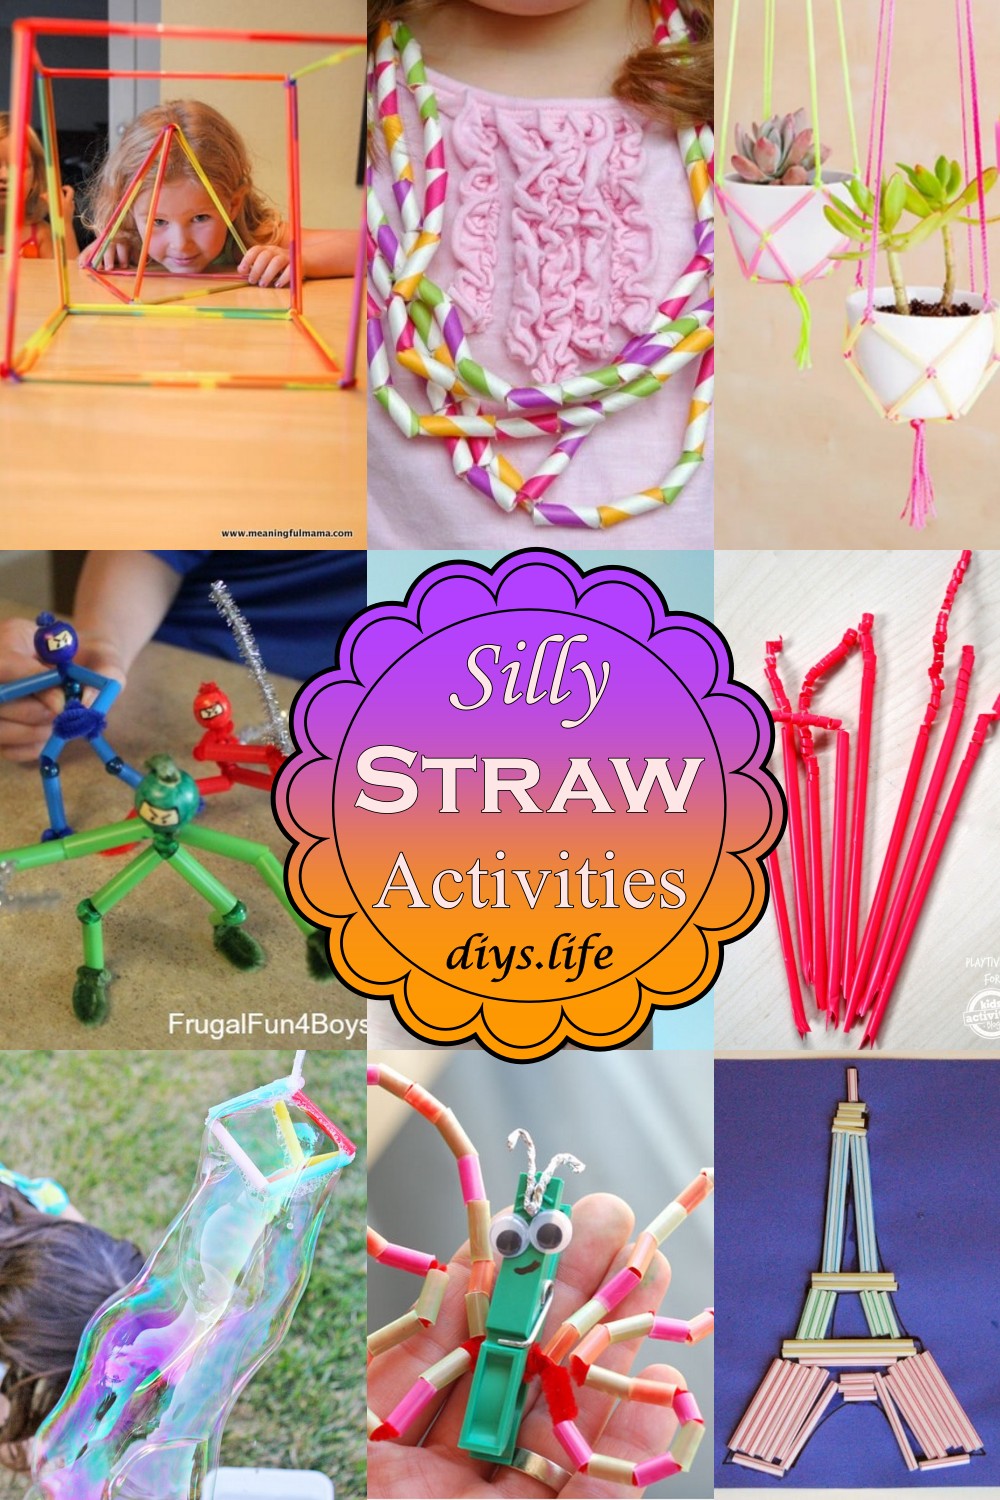 Silly Straw Activities